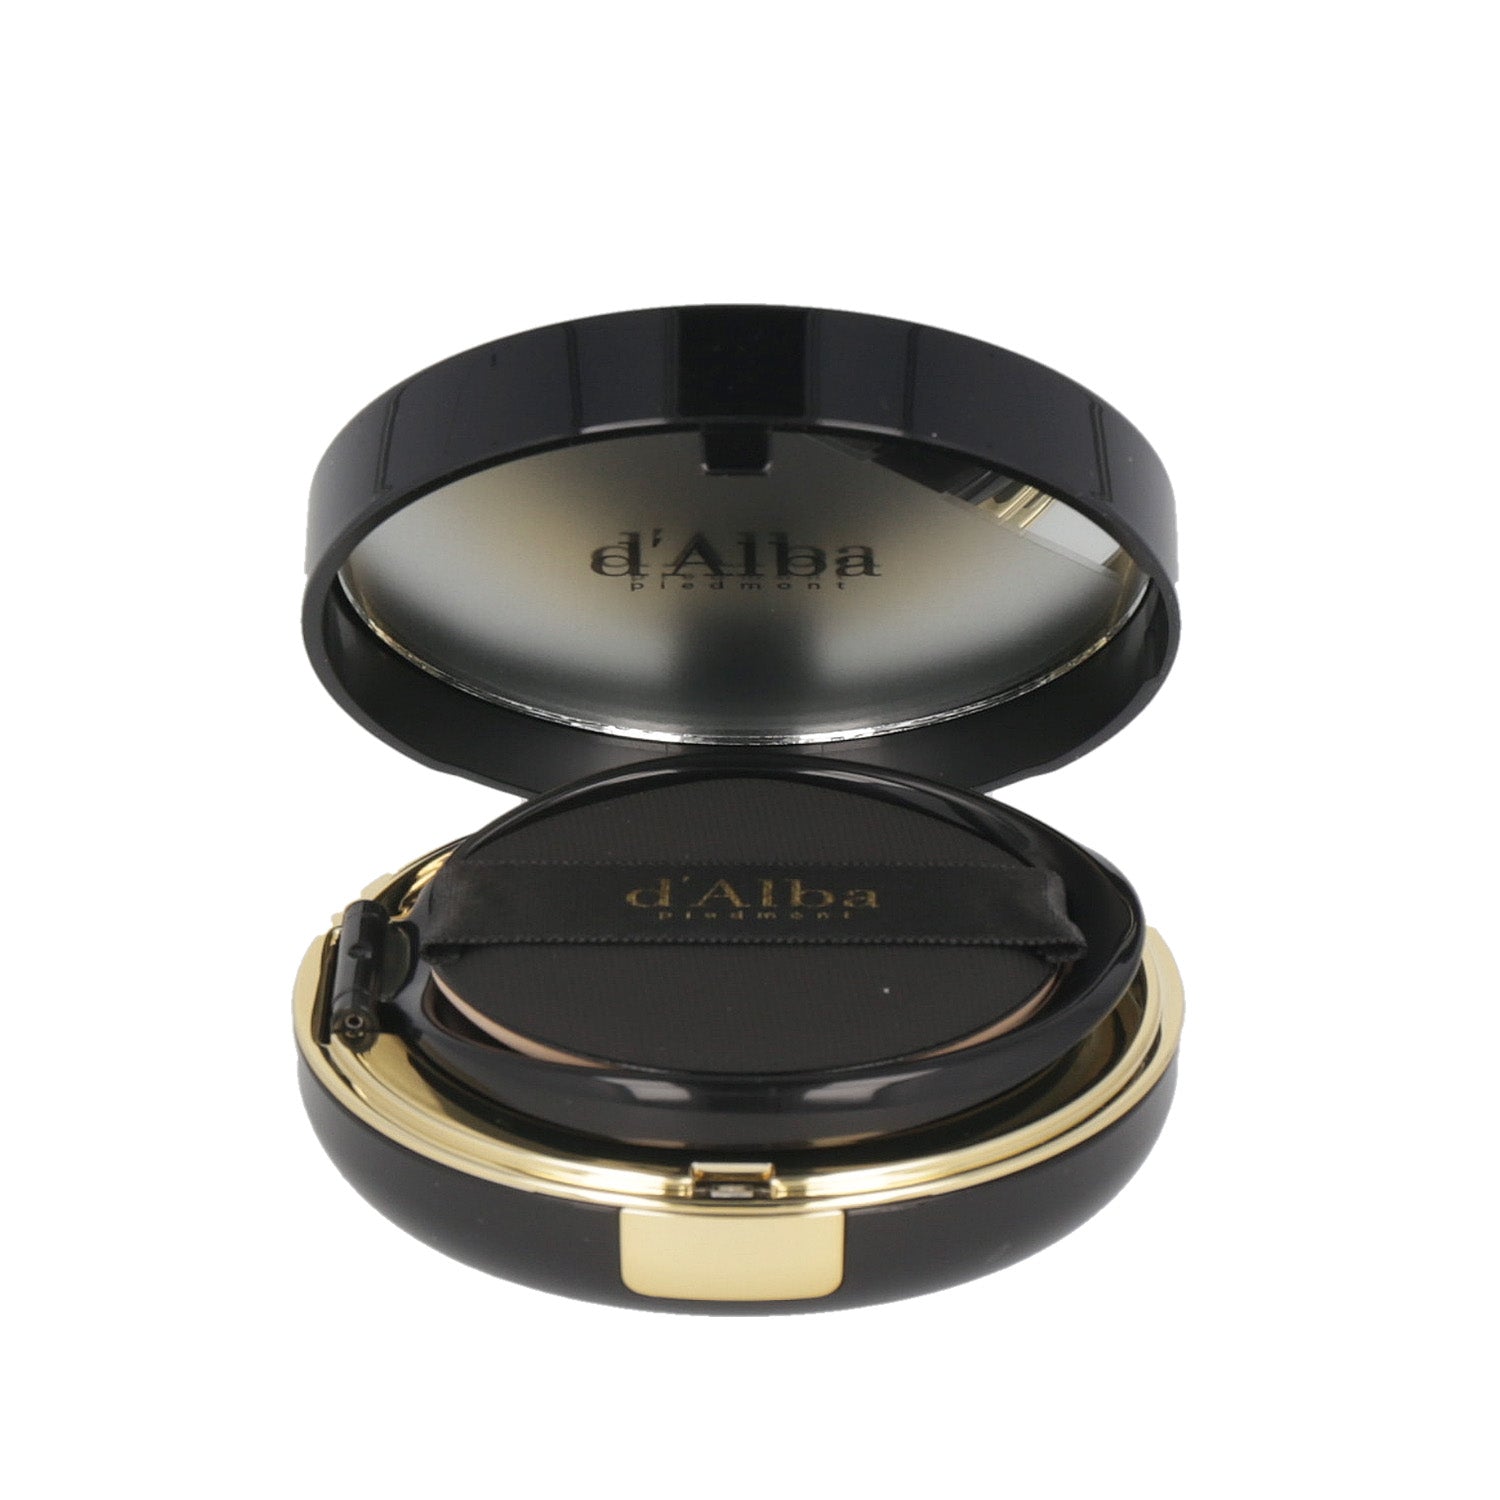 d'Alba Glow Fit Serum Cover Cushion 15g SPF50+ PA++++ -  provides excellent coverage while delivering skincare benefits, ensuring your skin looks flawless and feels nourished.